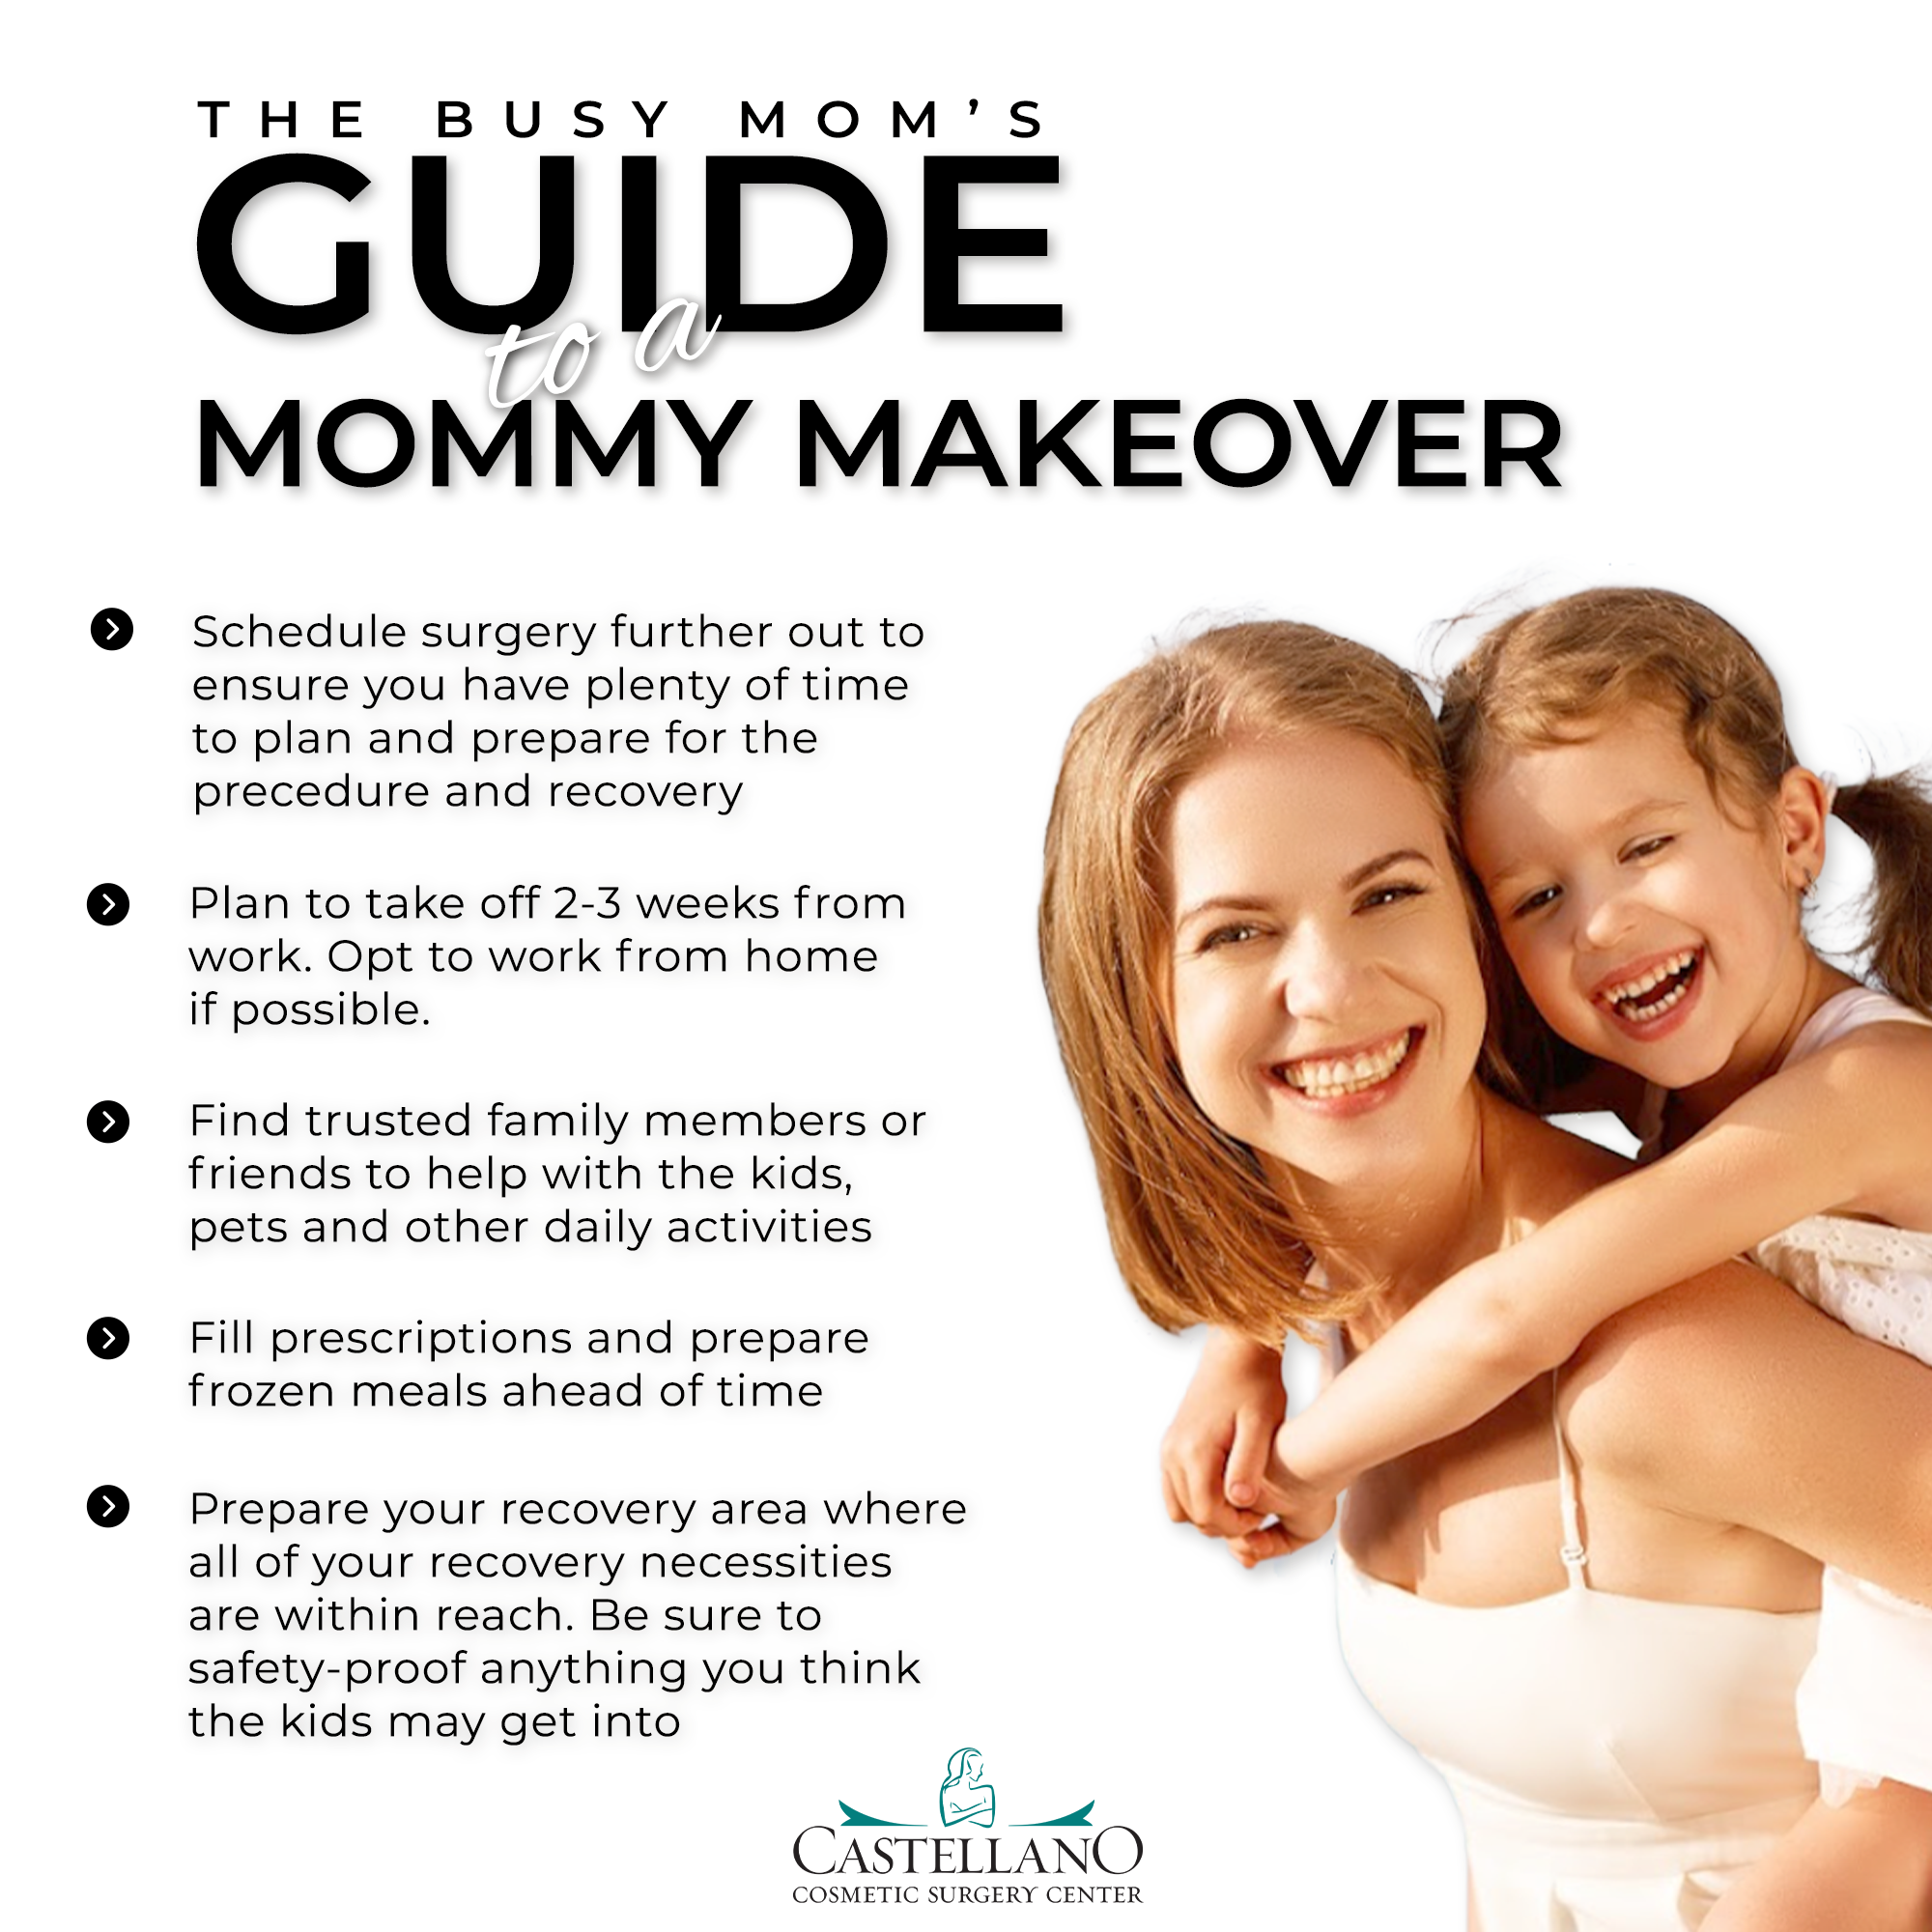 The Busy Mom’s Guide to a Mommy Makeover